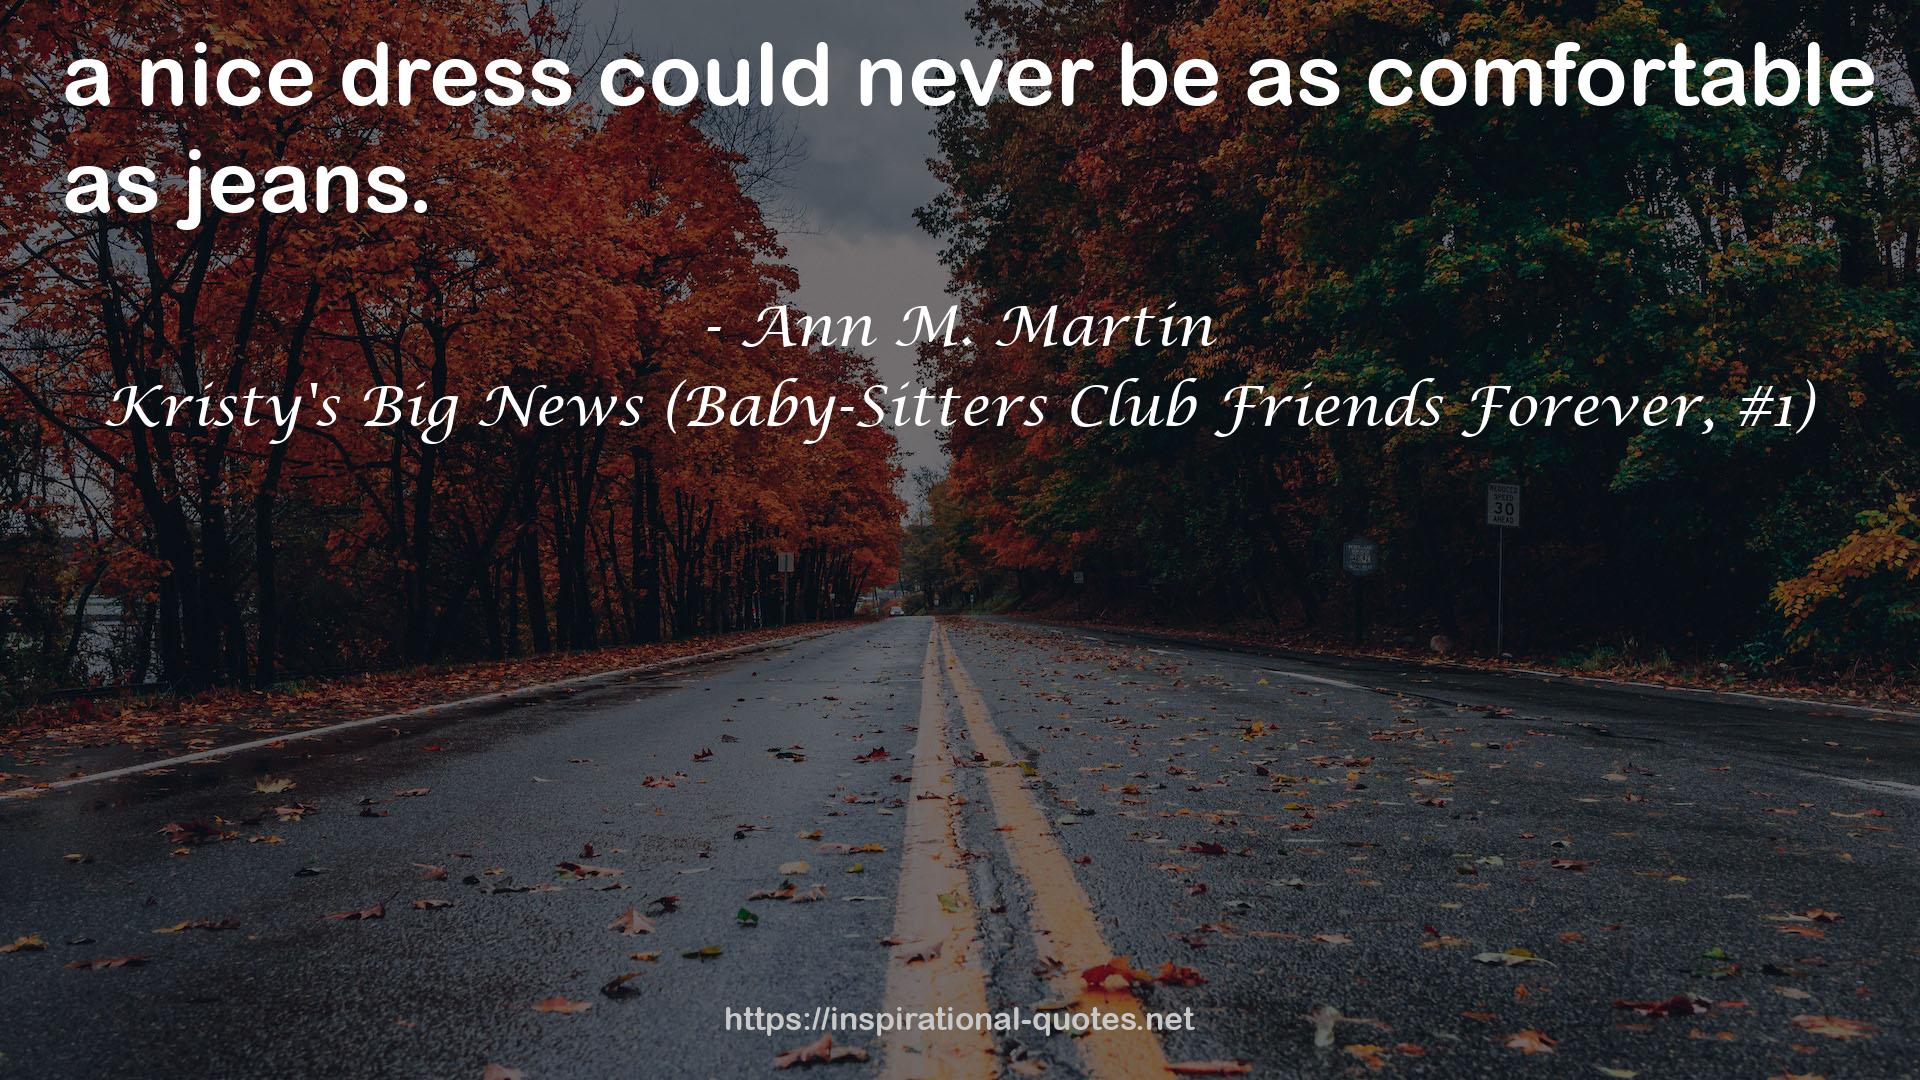 Kristy's Big News (Baby-Sitters Club Friends Forever, #1) QUOTES